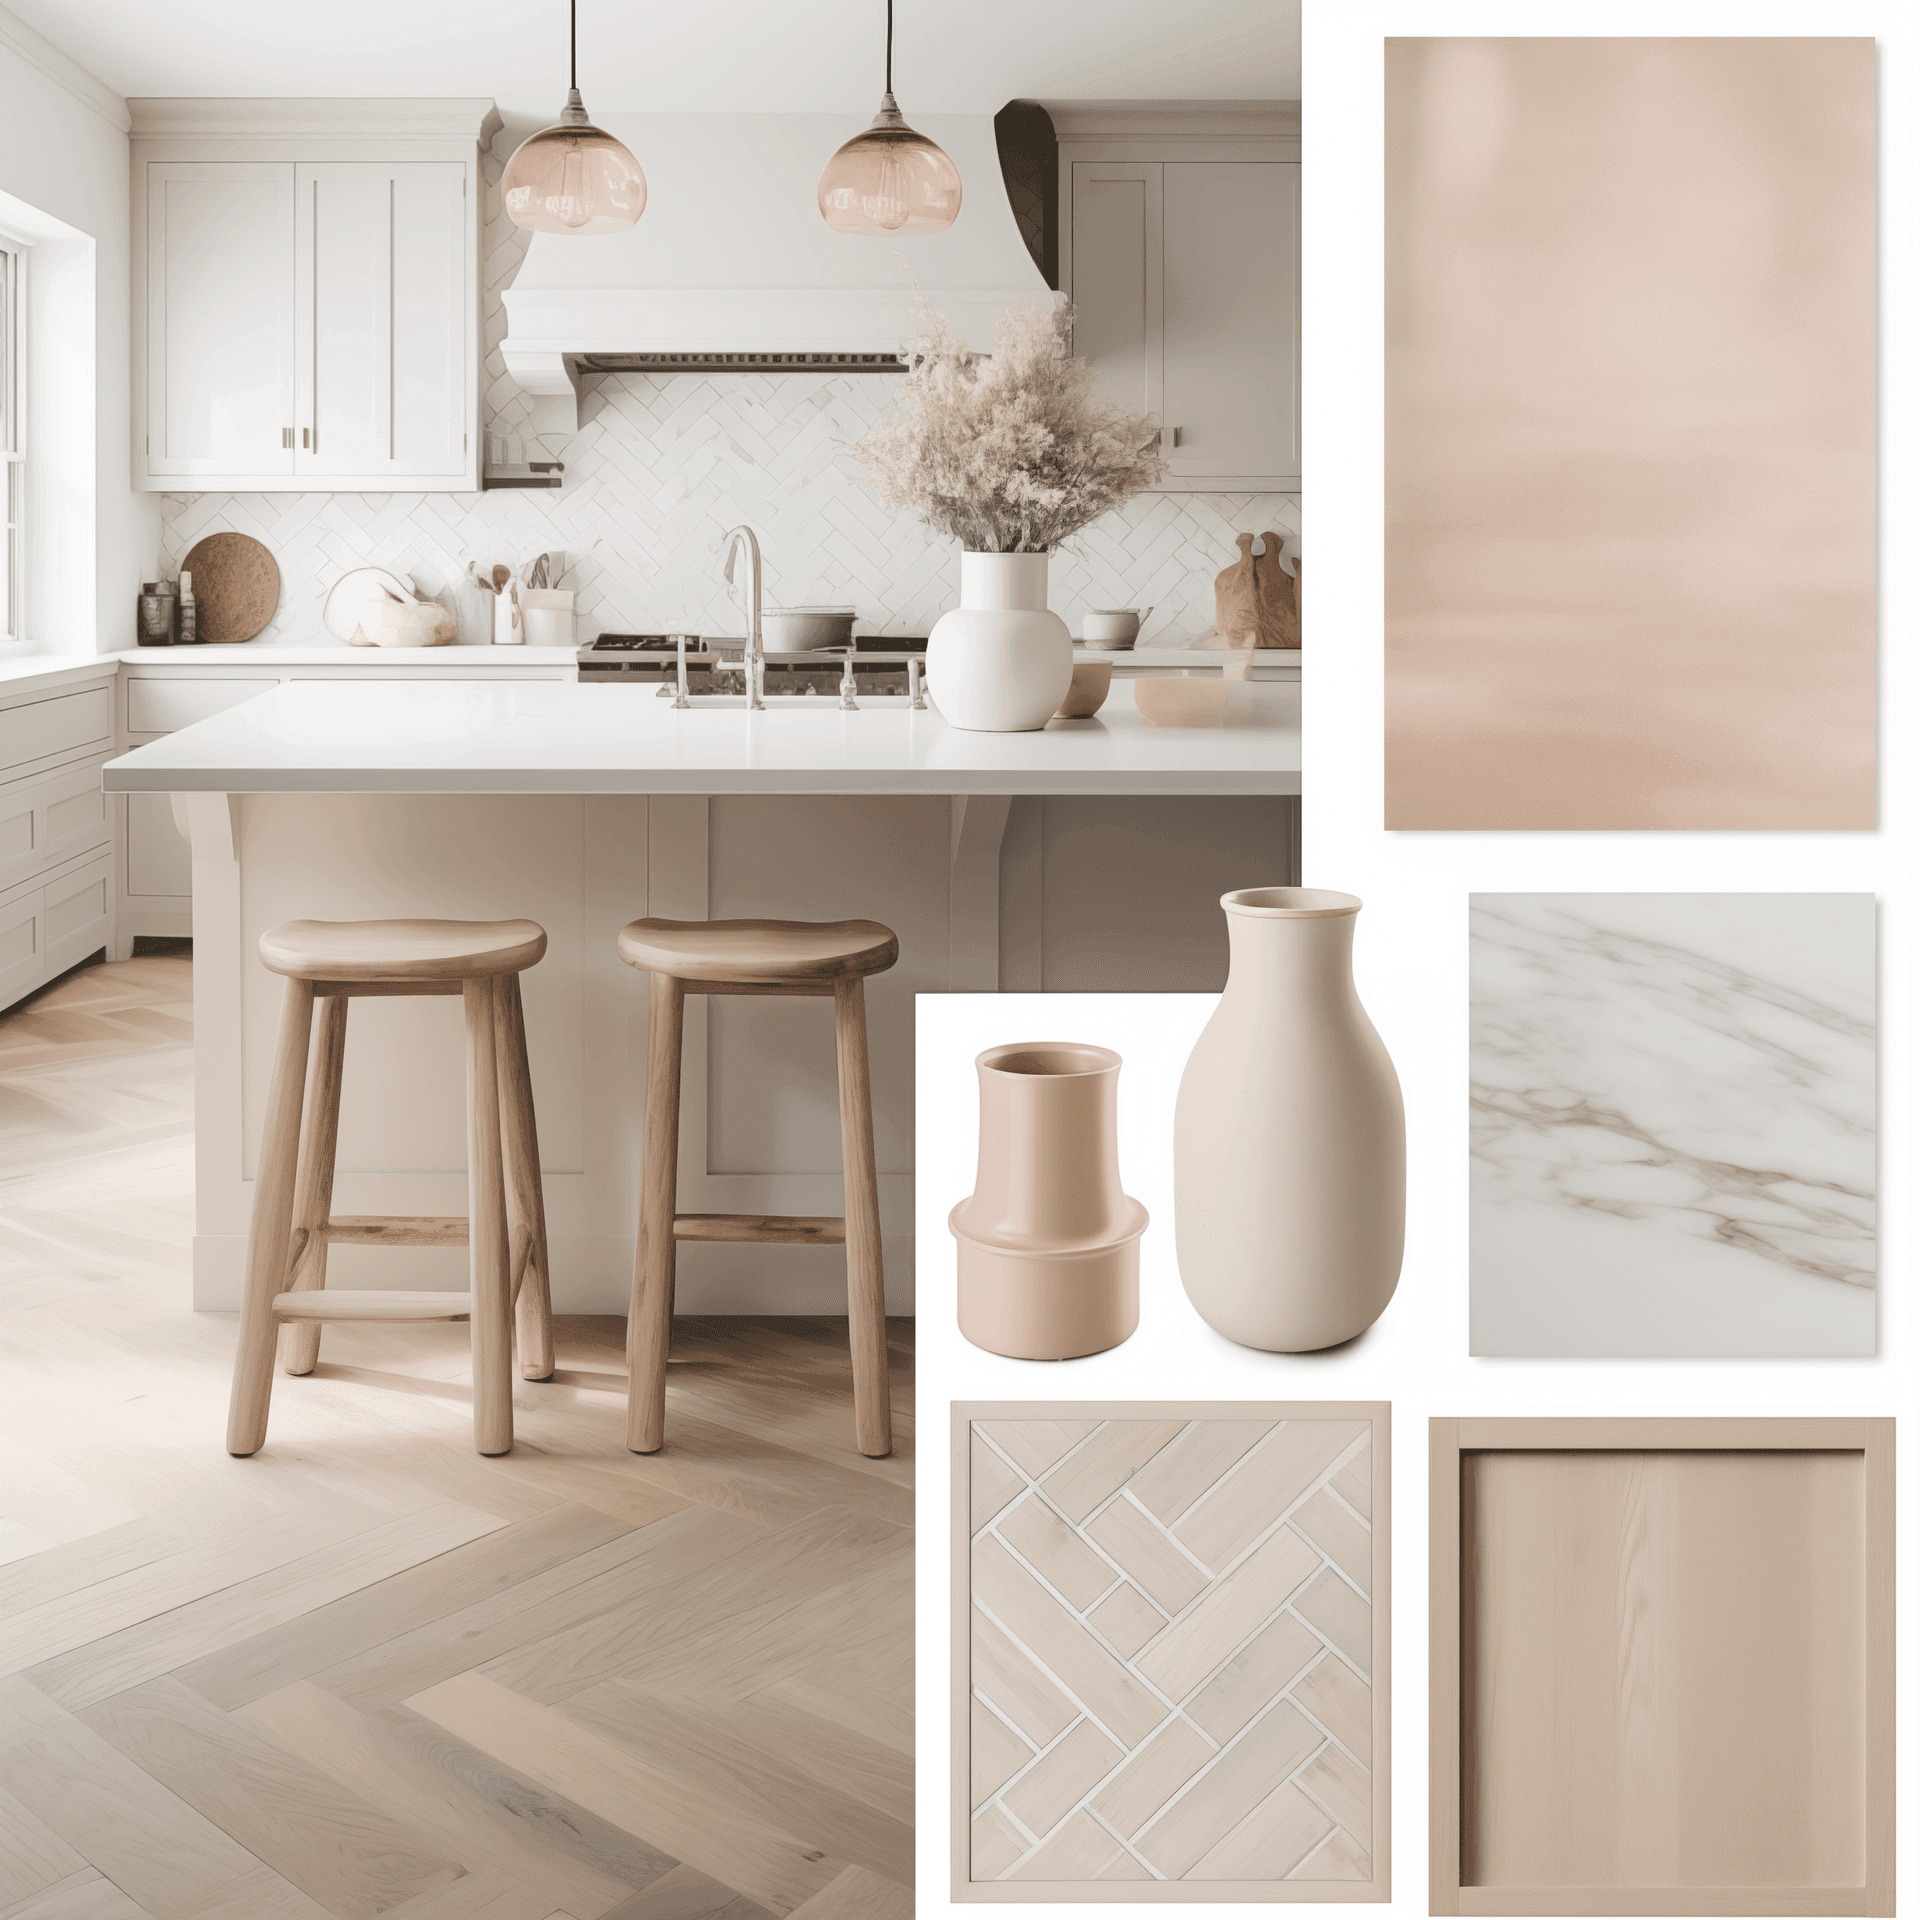 A traditional feminine kitchen with a blush and white oak color palette